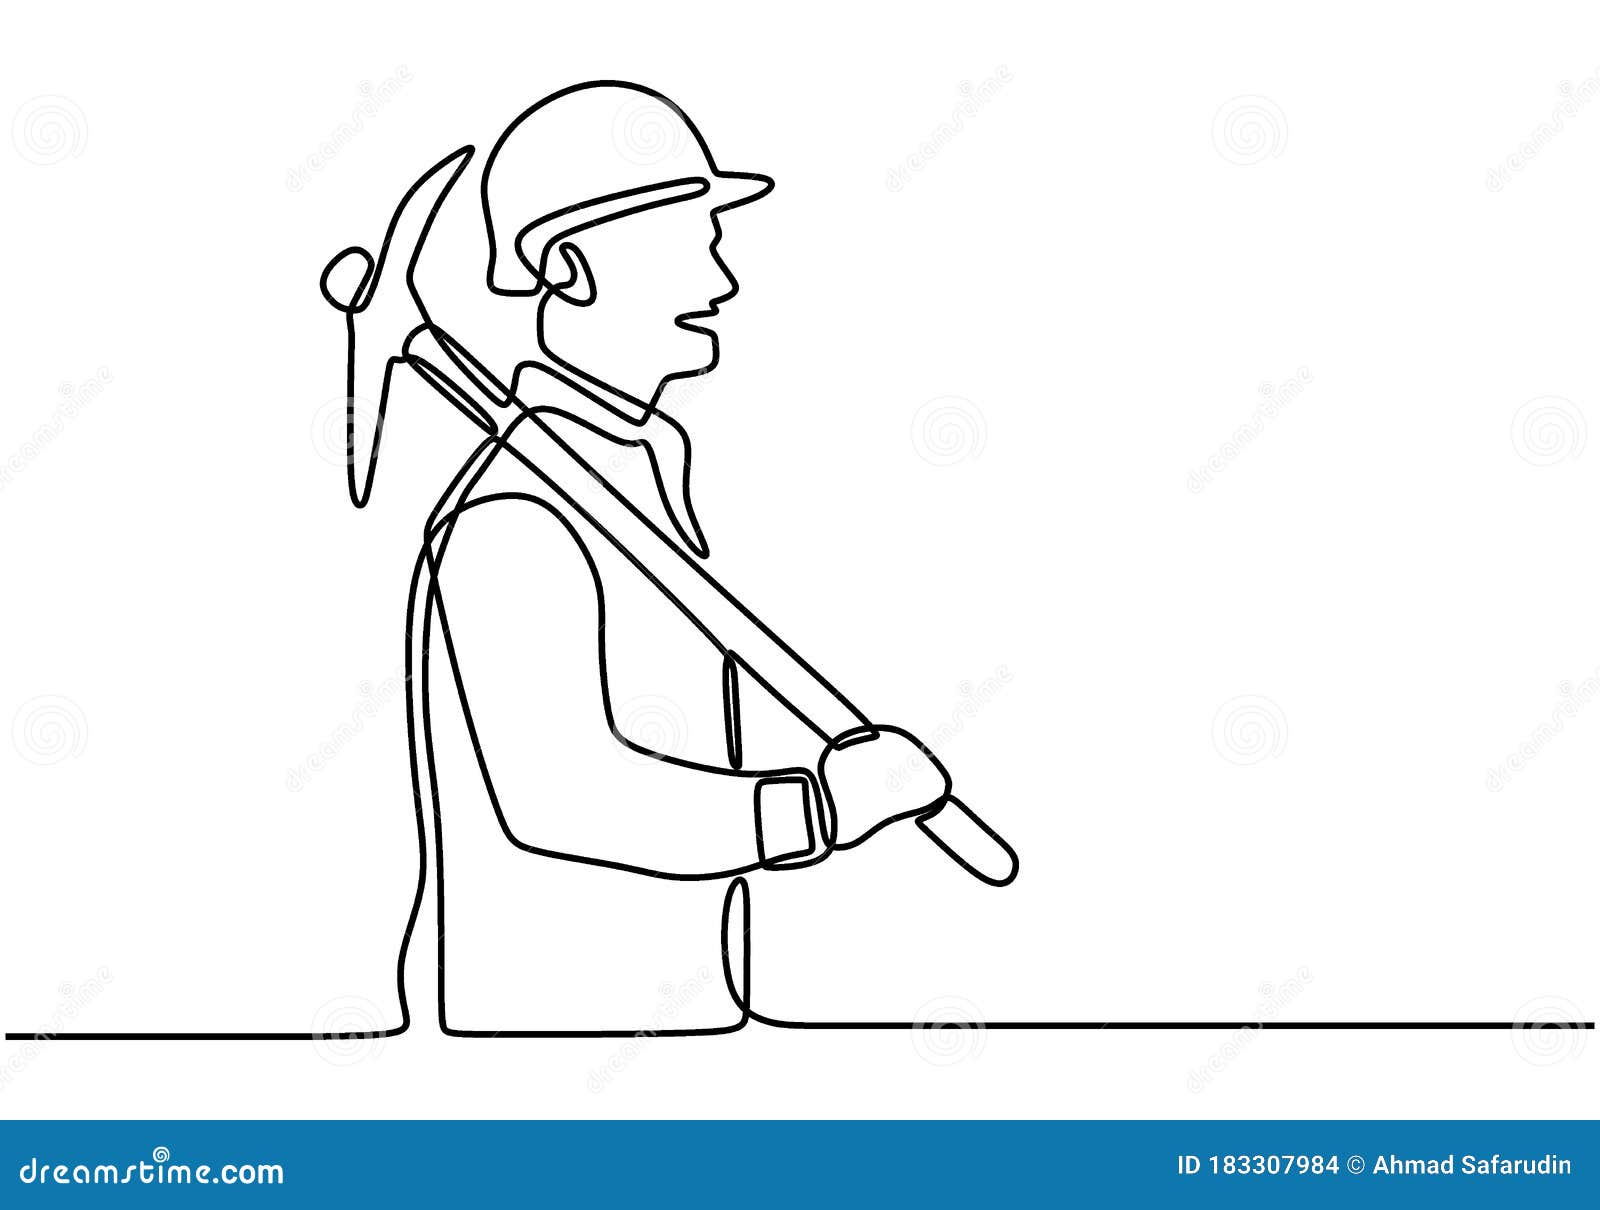 Single Line Drawing Of Young Construction Worker Carrying Building Tools Handyman Wearing Helmet To Safety Work Building Stock Vector Illustration Of Manual Drawing 183307984